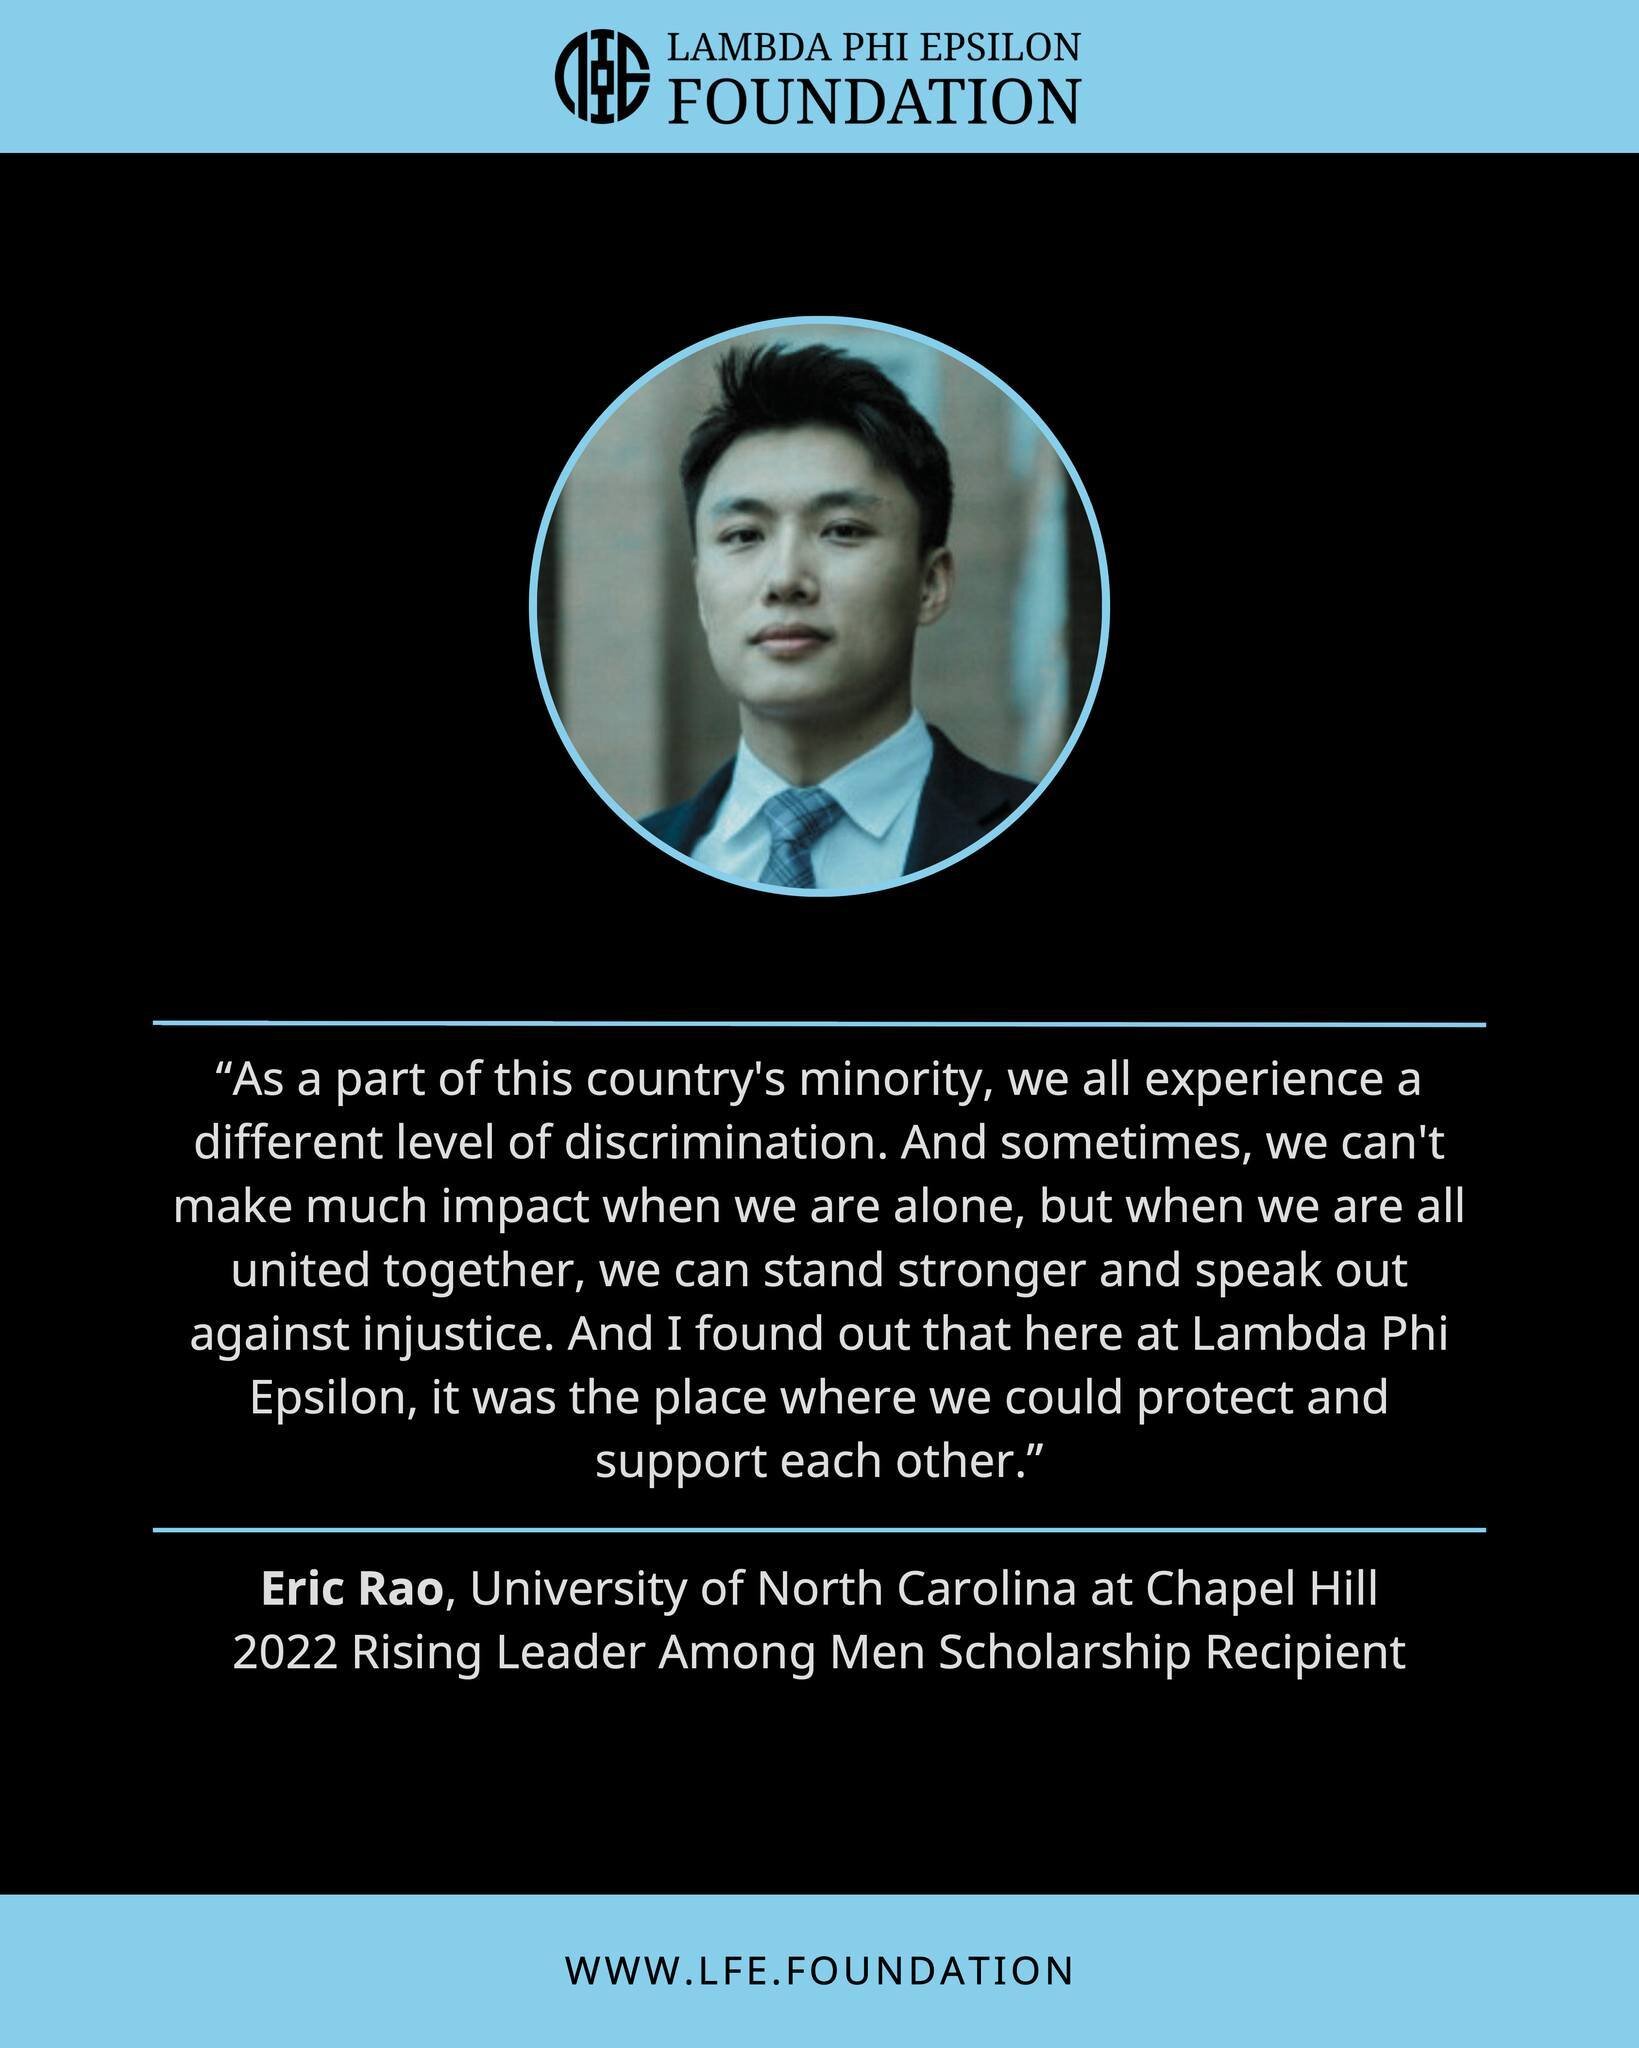 Hear from the journey of Eric Rao, our 2022 Rising Leader Among Men Scholarship recipient! His global internships at Pacific Securities and Guotai Junan International showcase his strengths in business intelligence and investment banking. Eric is not